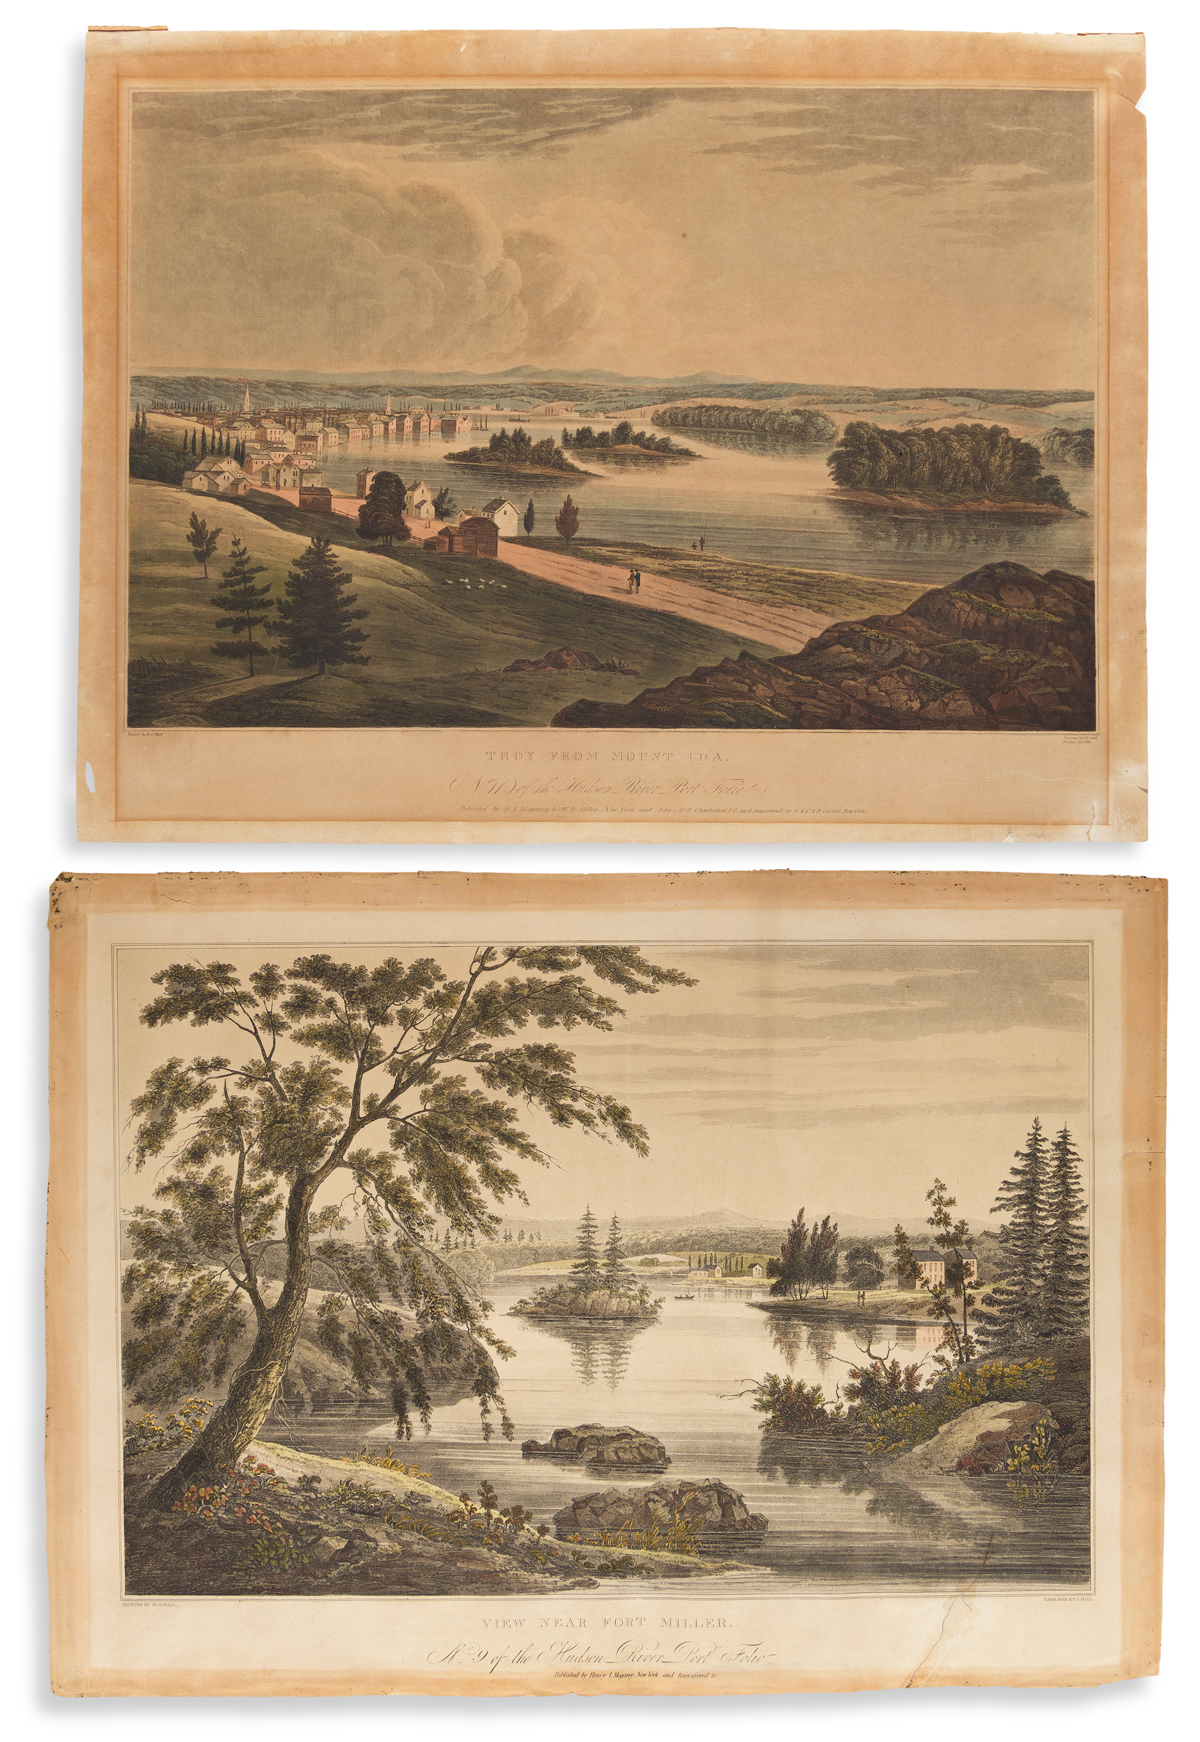 (HUDSON RIVER PORTFOLIO.) John Hill; after William Guy Wall. Group of 5 hand-colored aquatint and engraved plates.